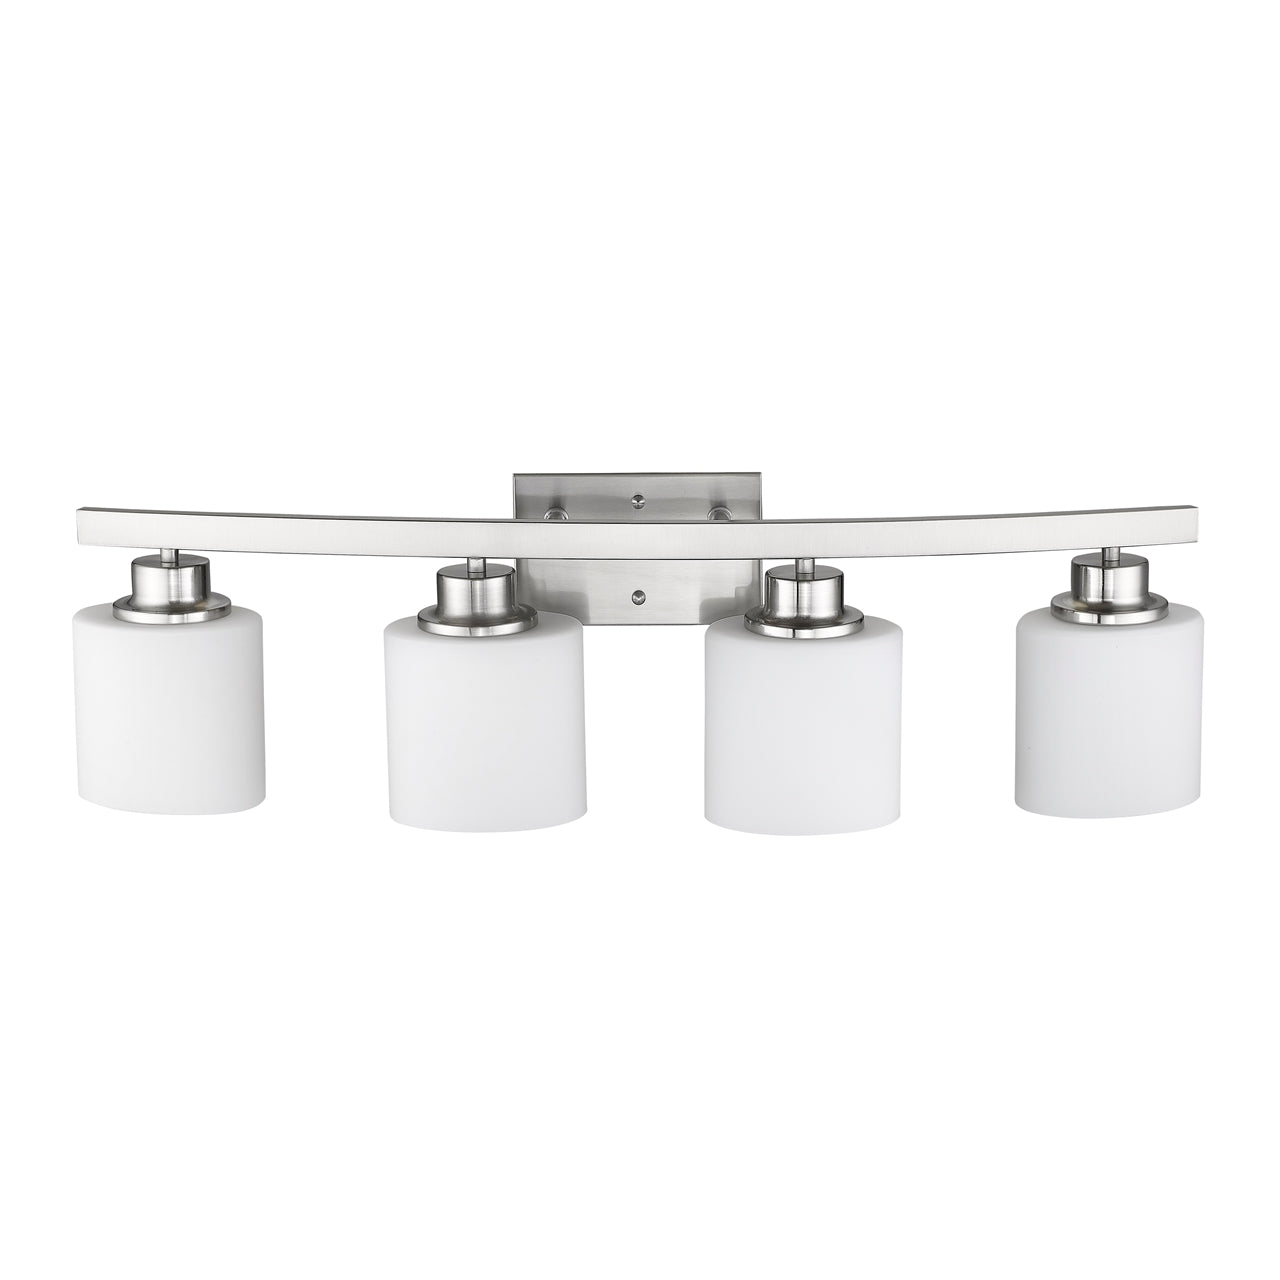 AALIYAH Contemporary 4 Light Brushed Nickel Bath Vanity Light Opal White Glass 32" Wide